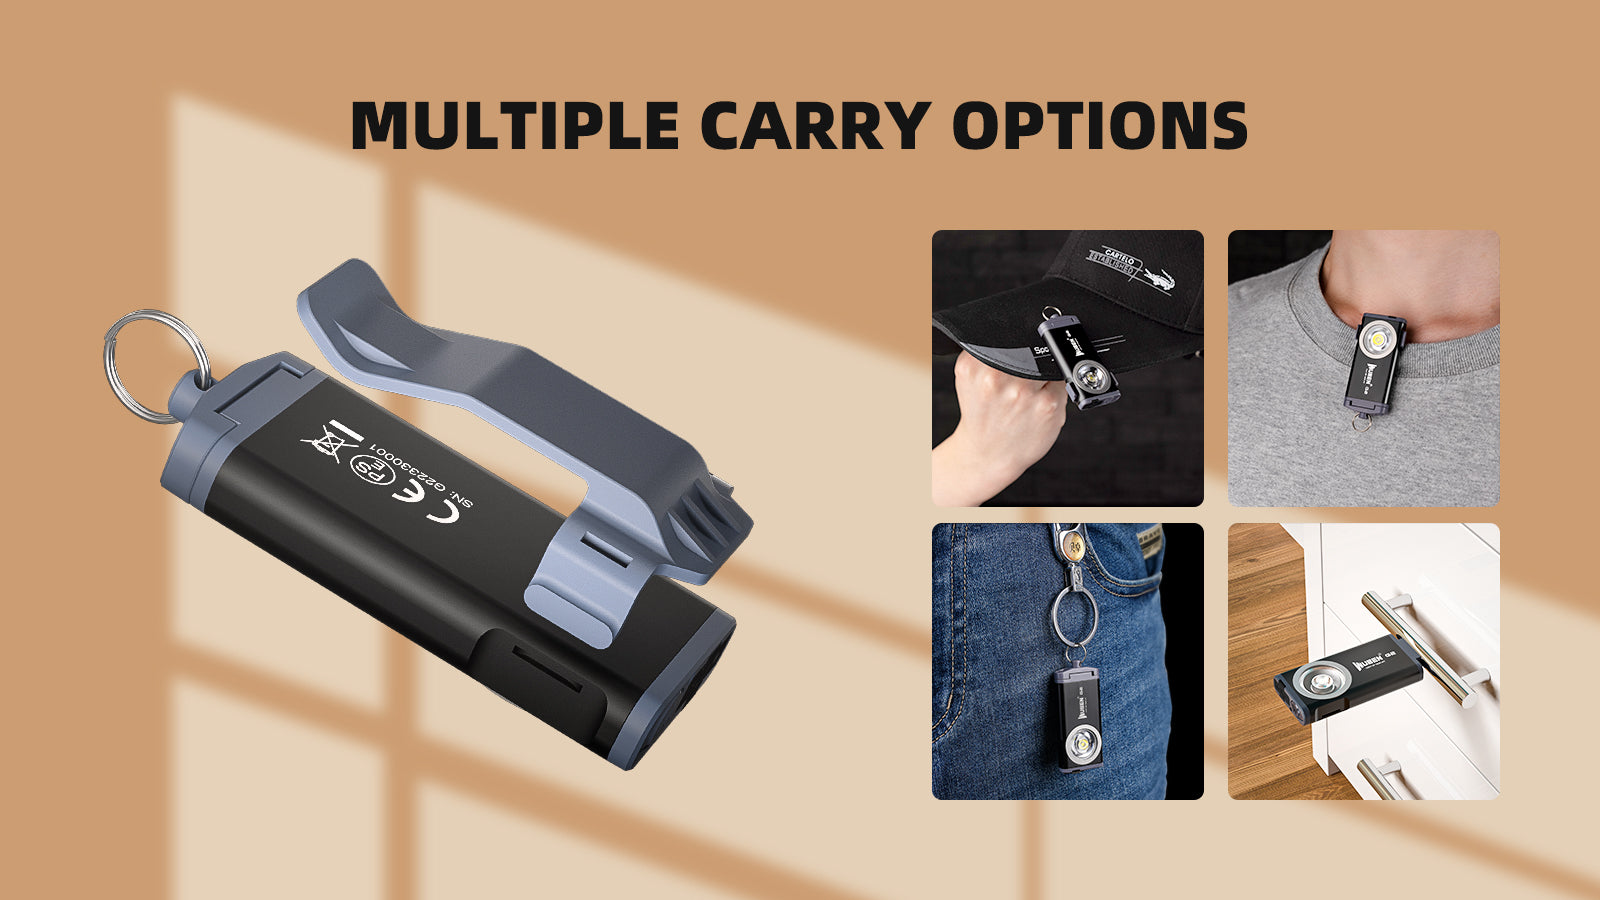 MULTIPLE CARRY OPTIONS